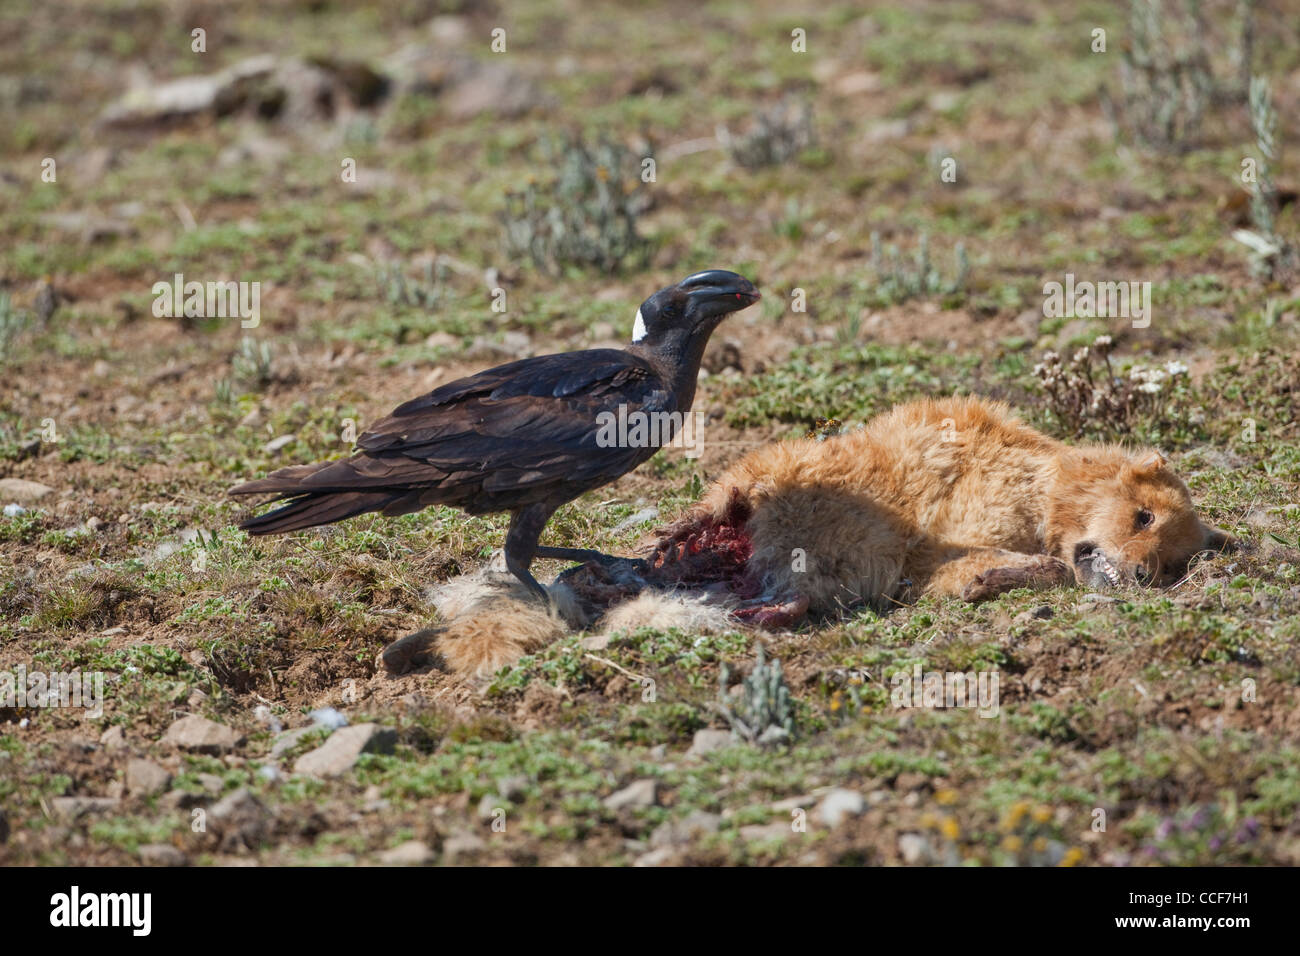 Thick-billed Raven (Corvus crassirostris). Using massive bill to break into the carcass of a feral dog. Central Ethiopia. Stock Photo